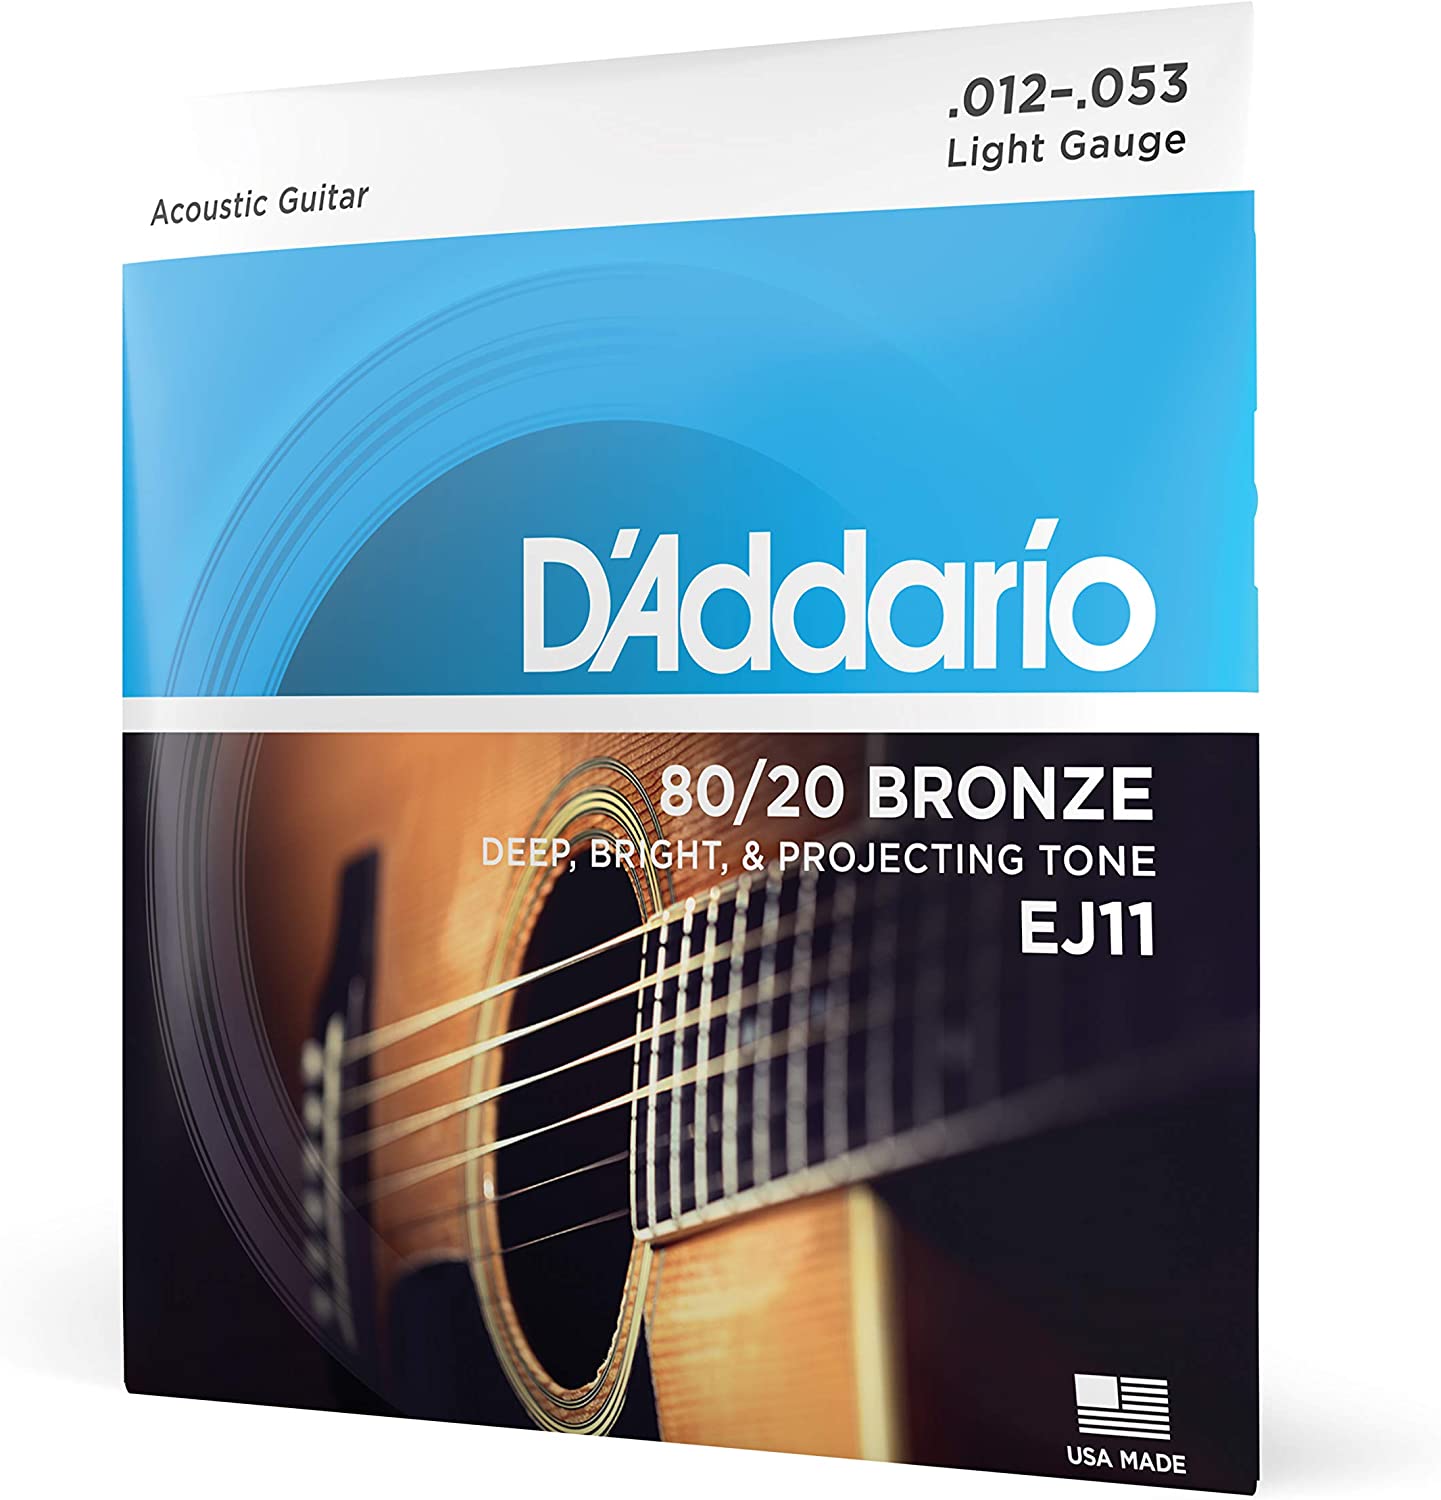 D’Addario EJ11 80/20 Bronze Acoustic Guitar Strings on a white background